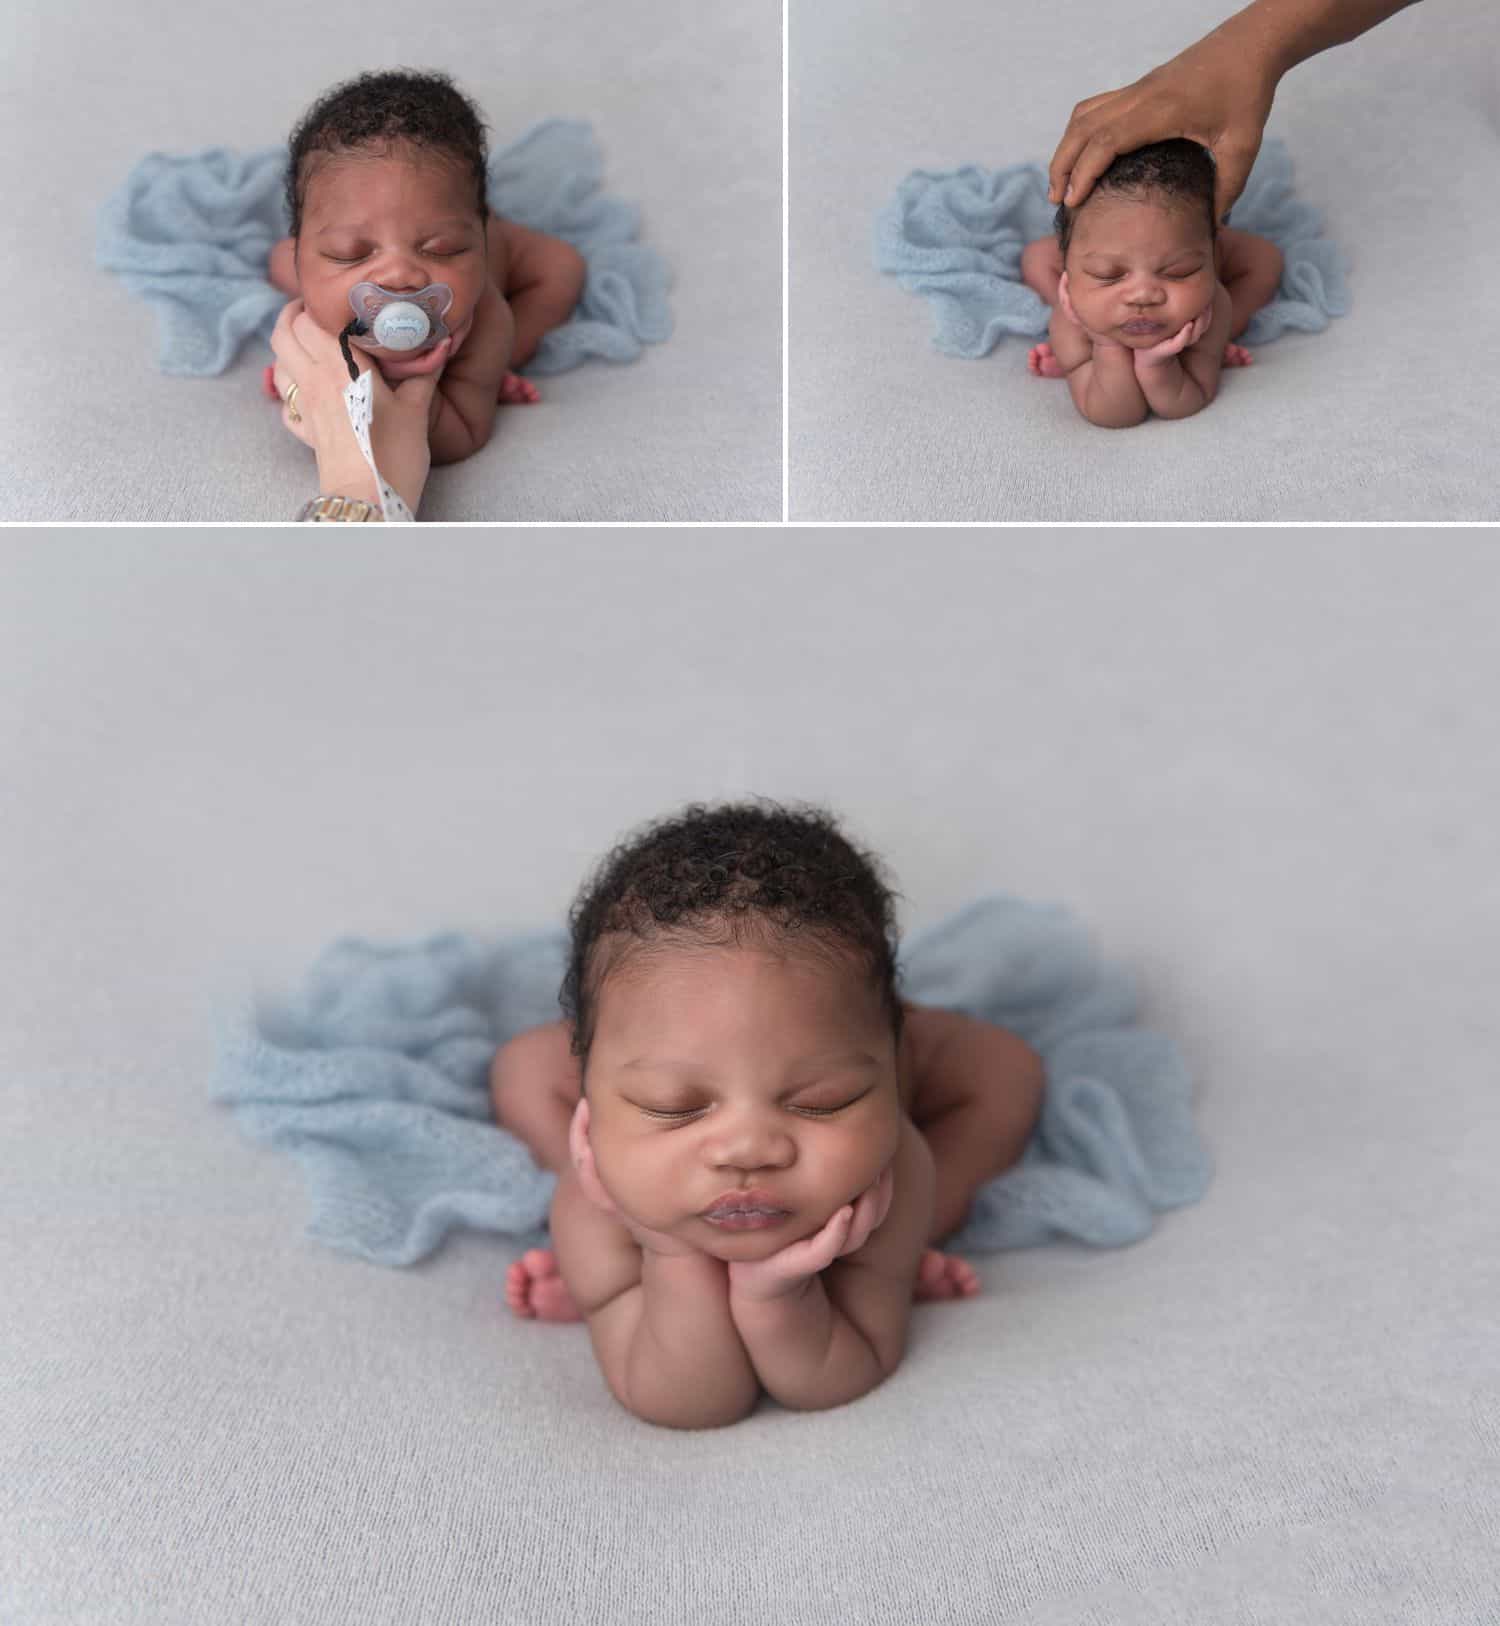 25 Unique And Adorable Newborn Photoshoot Ideas To Try